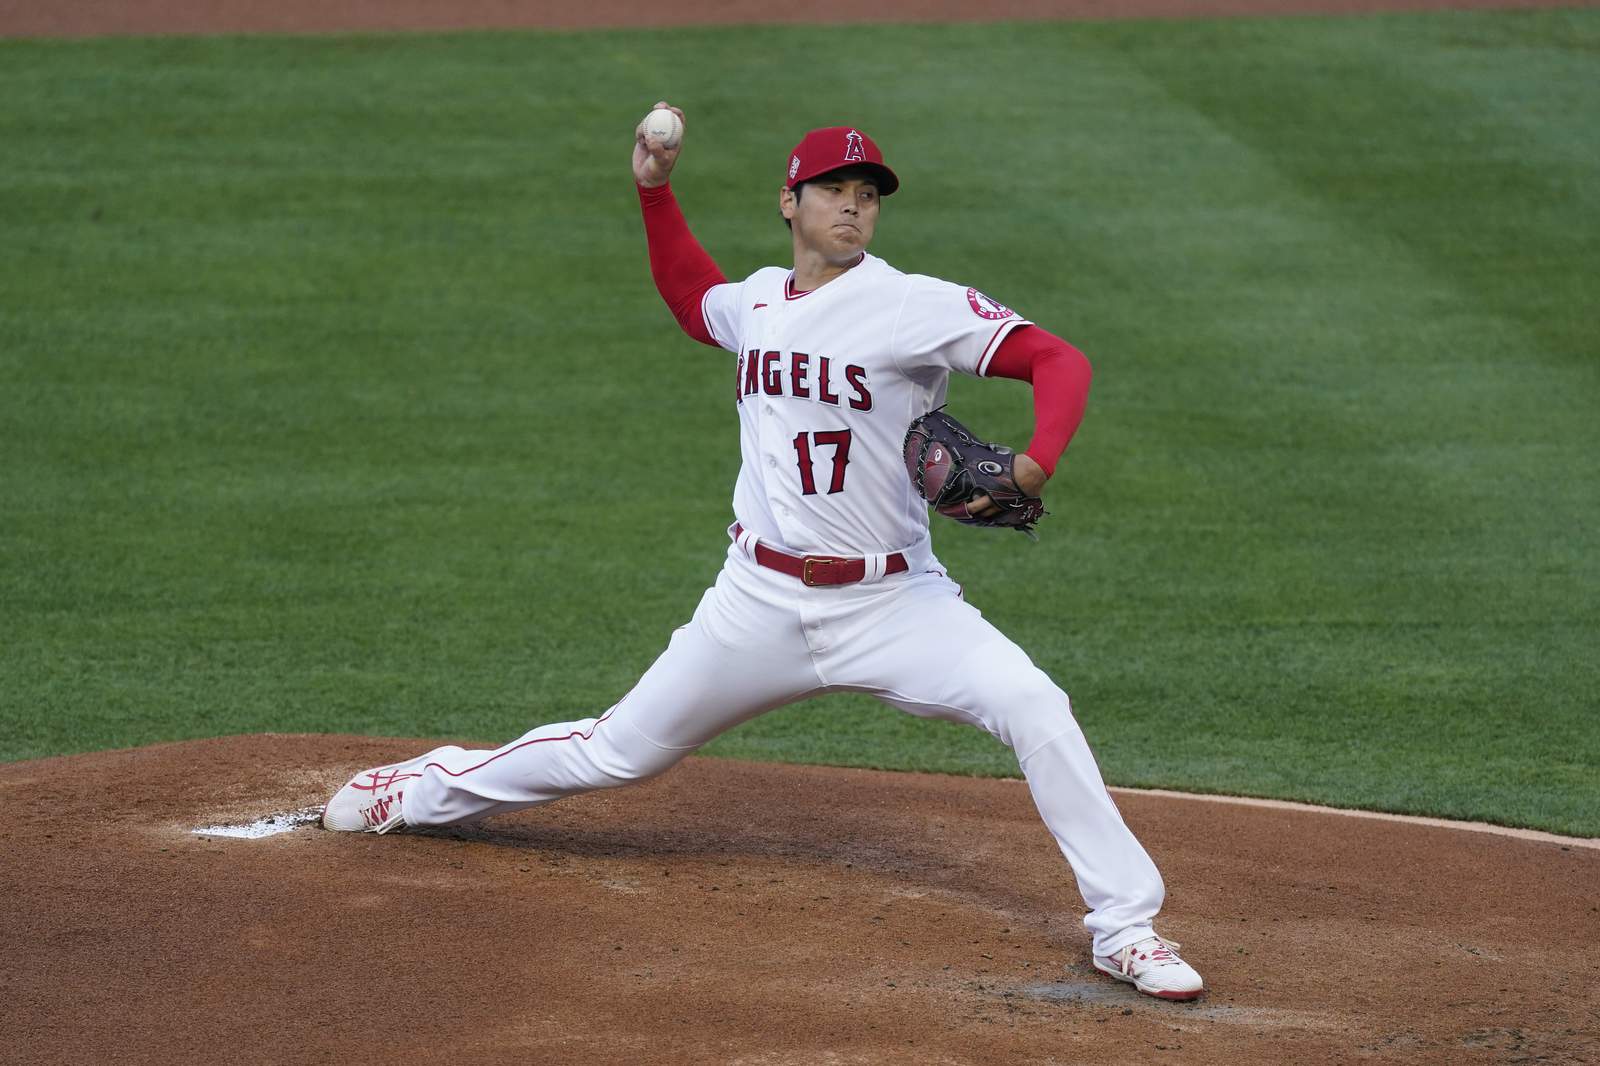 Shohei Ohtani homers, pitches into 5th inning for Angels